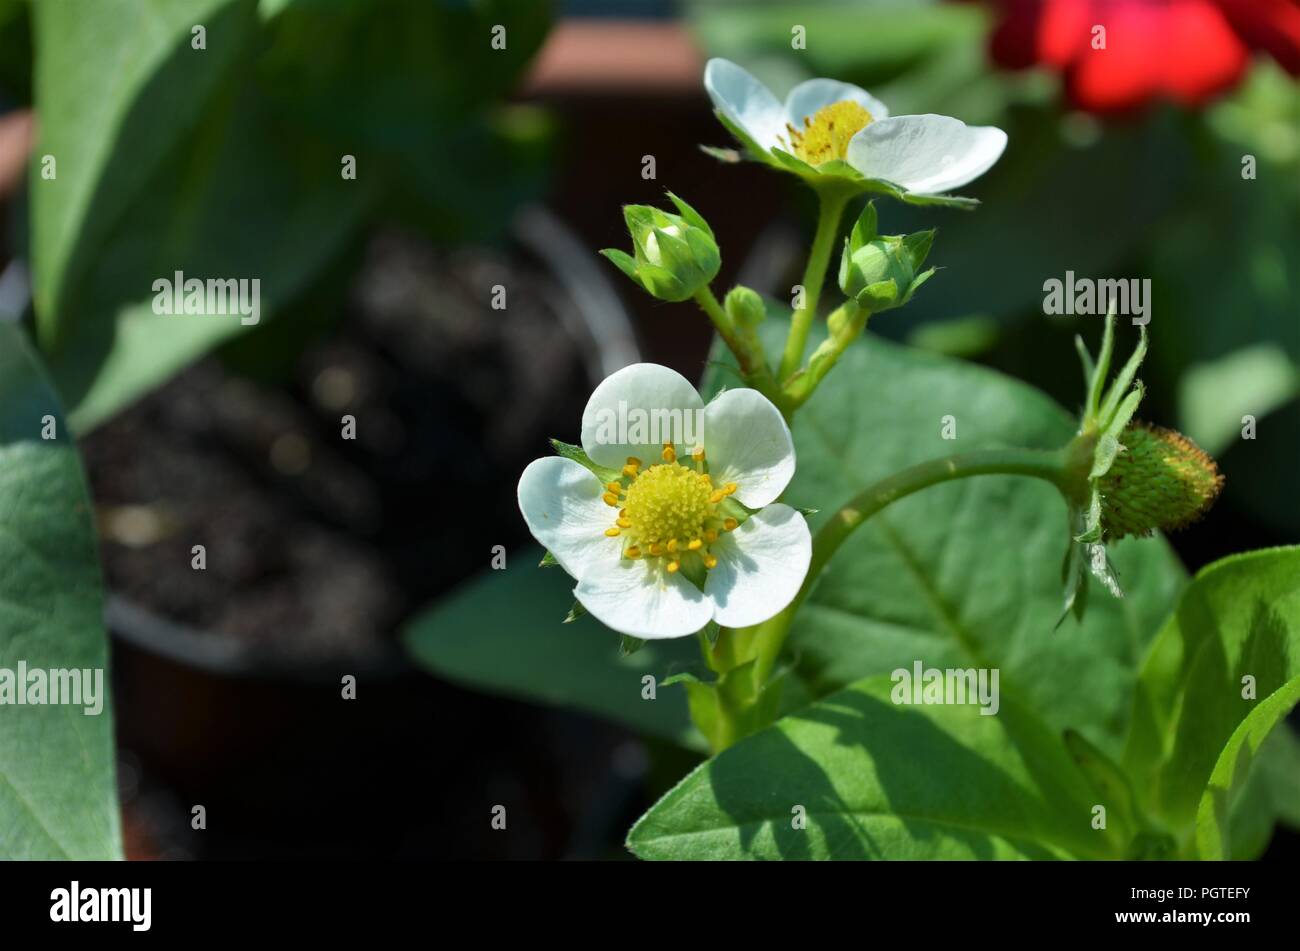 closeup shot of a strawberry flower during spring Stock Photo